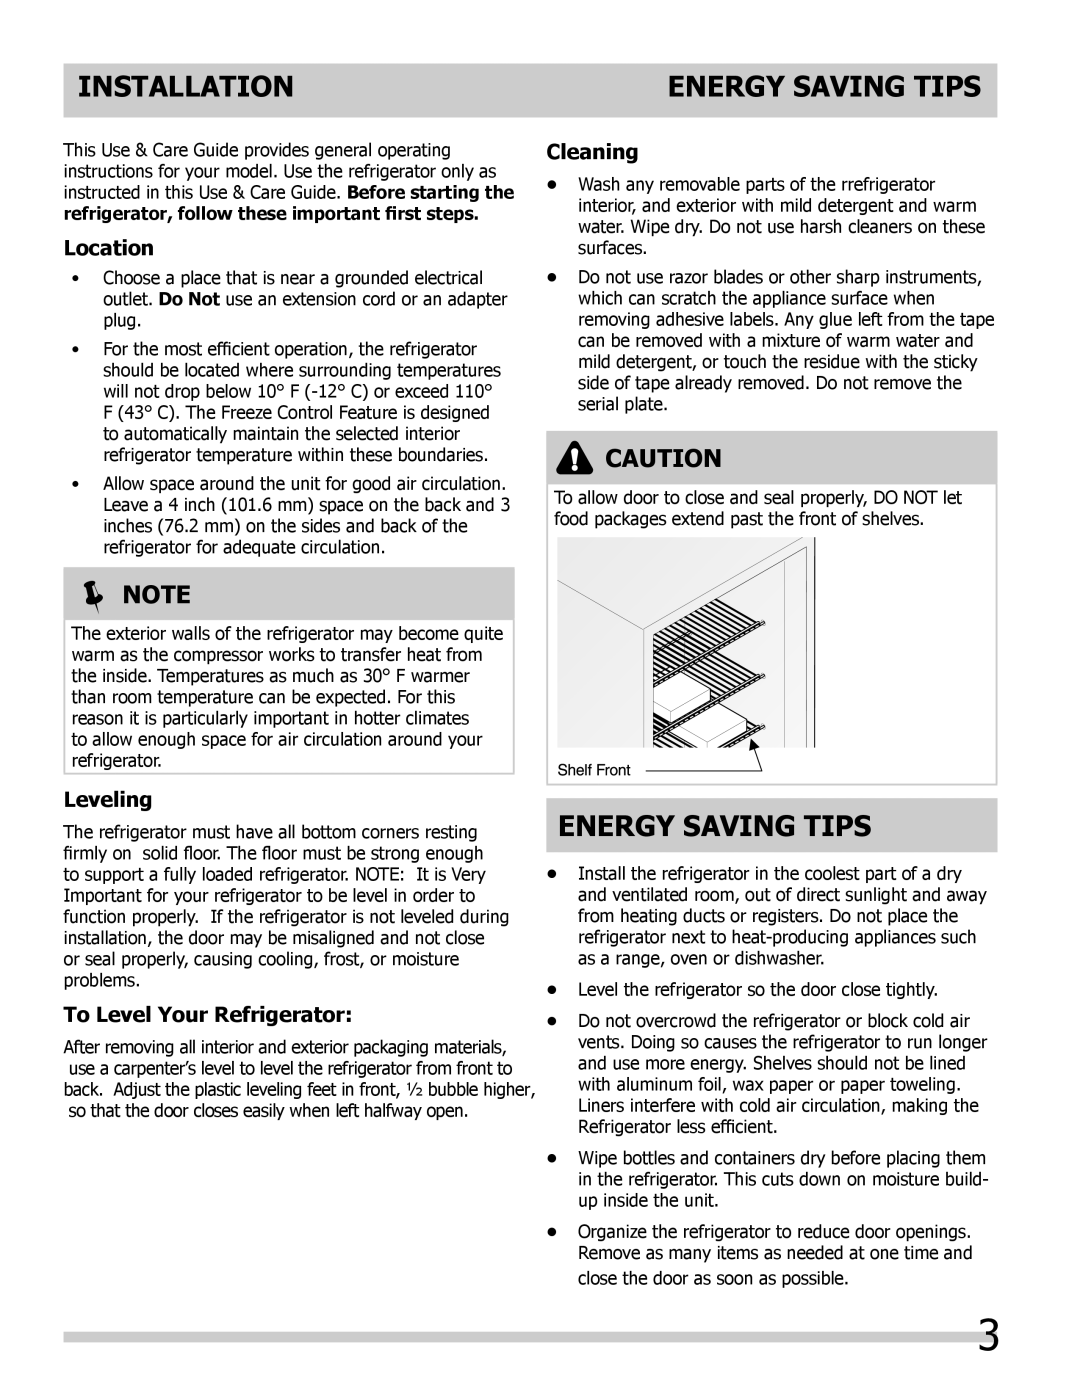 Keystone KSTRC312AW Installation, Energy Saving Tips,  Note, Location, Leveling, To Level Your Refrigerator, Cleaning 